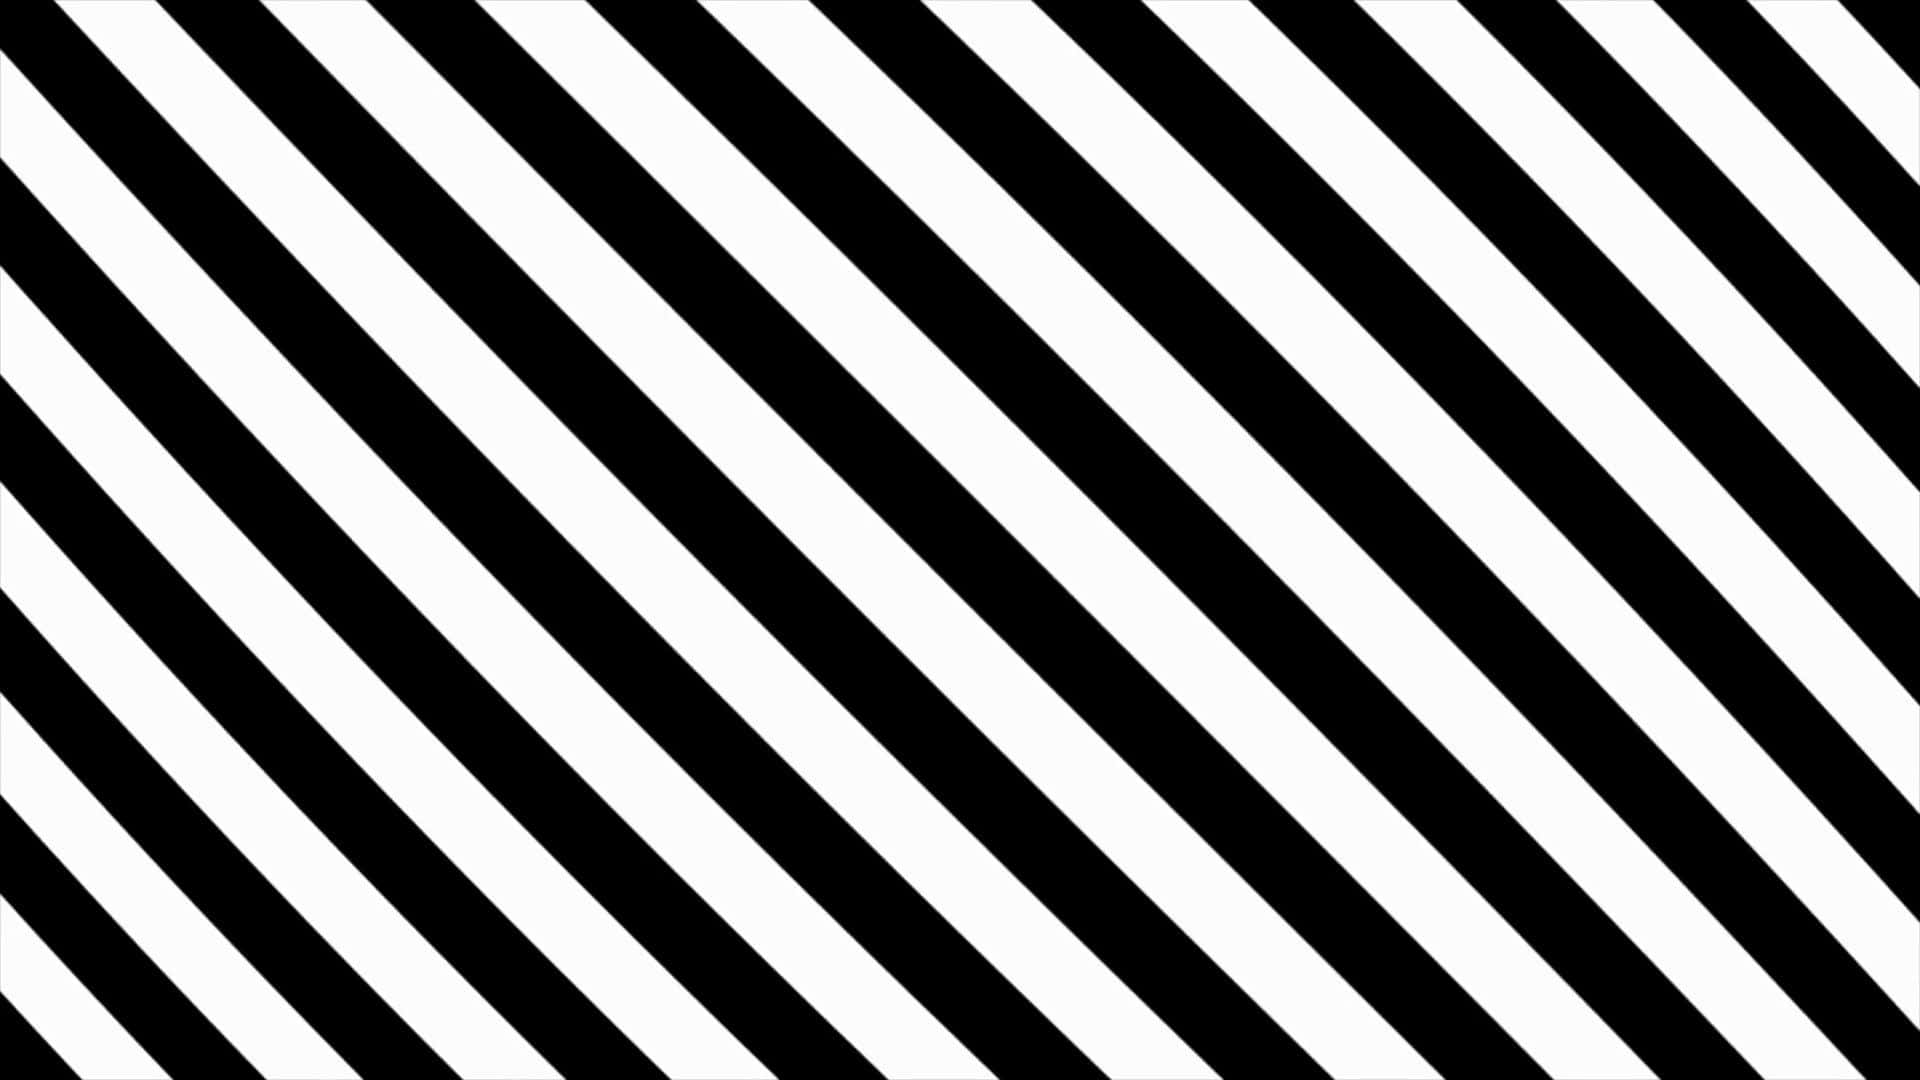 Abstract Black and White Striped Graphic